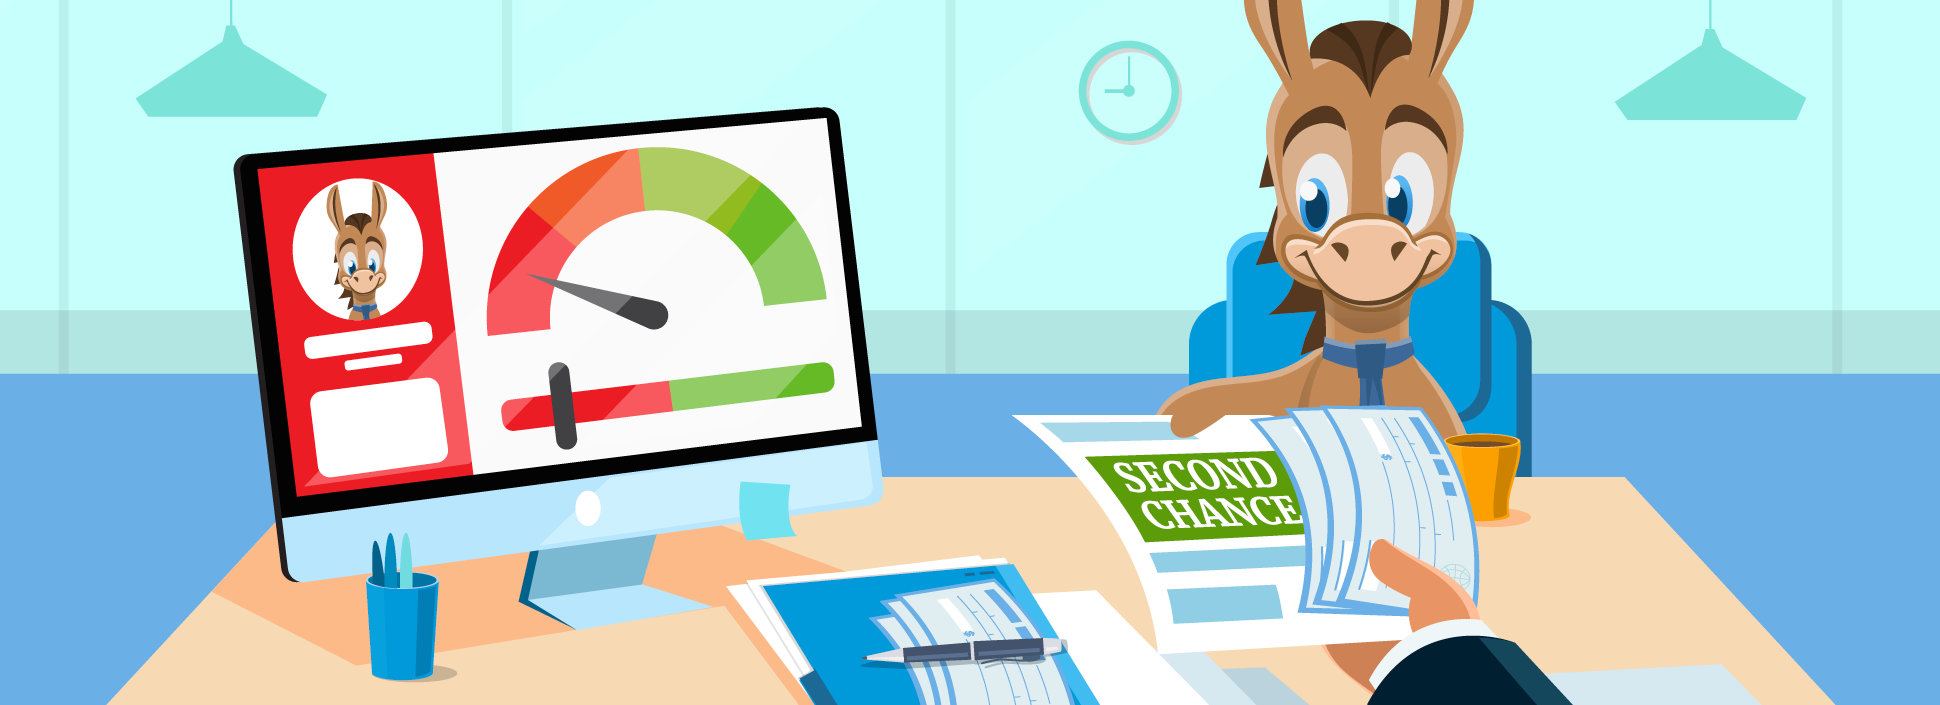 second chance checking accounts